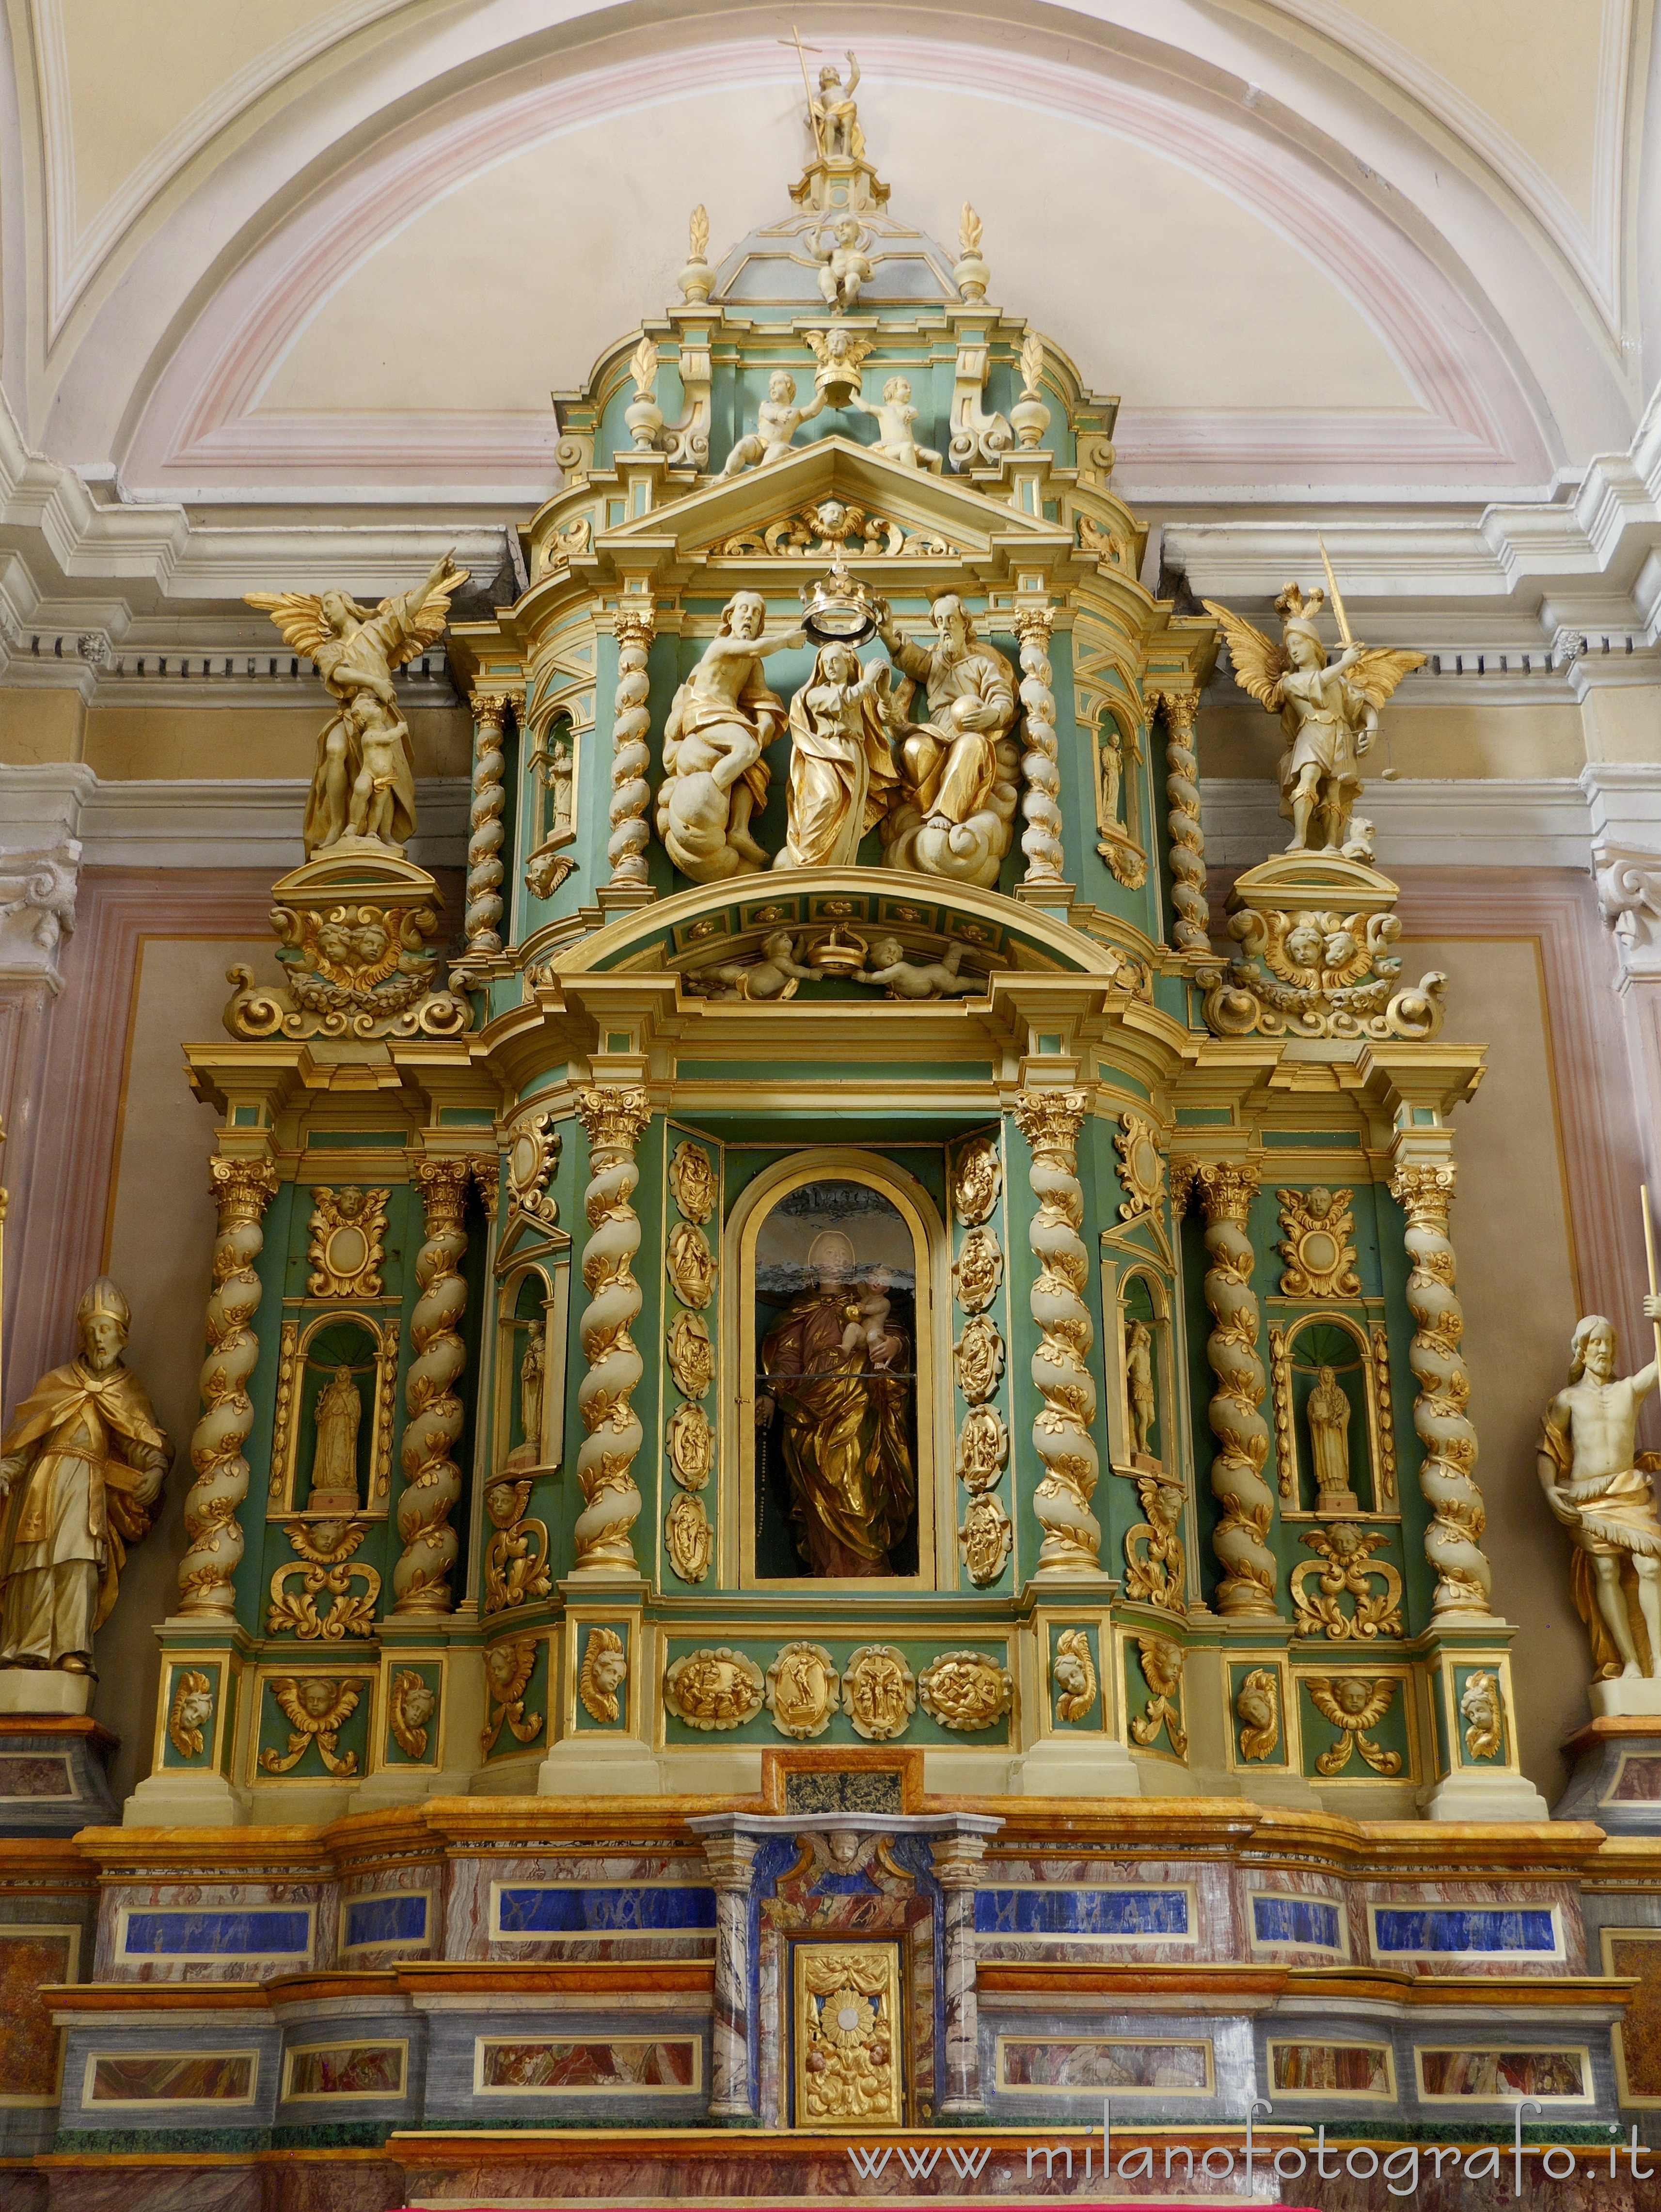 Ponderano (Biella, Italy): Retable of the altar of the Virgin of the Rosary in the Church of St. Lawrence Martyr - Ponderano (Biella, Italy)